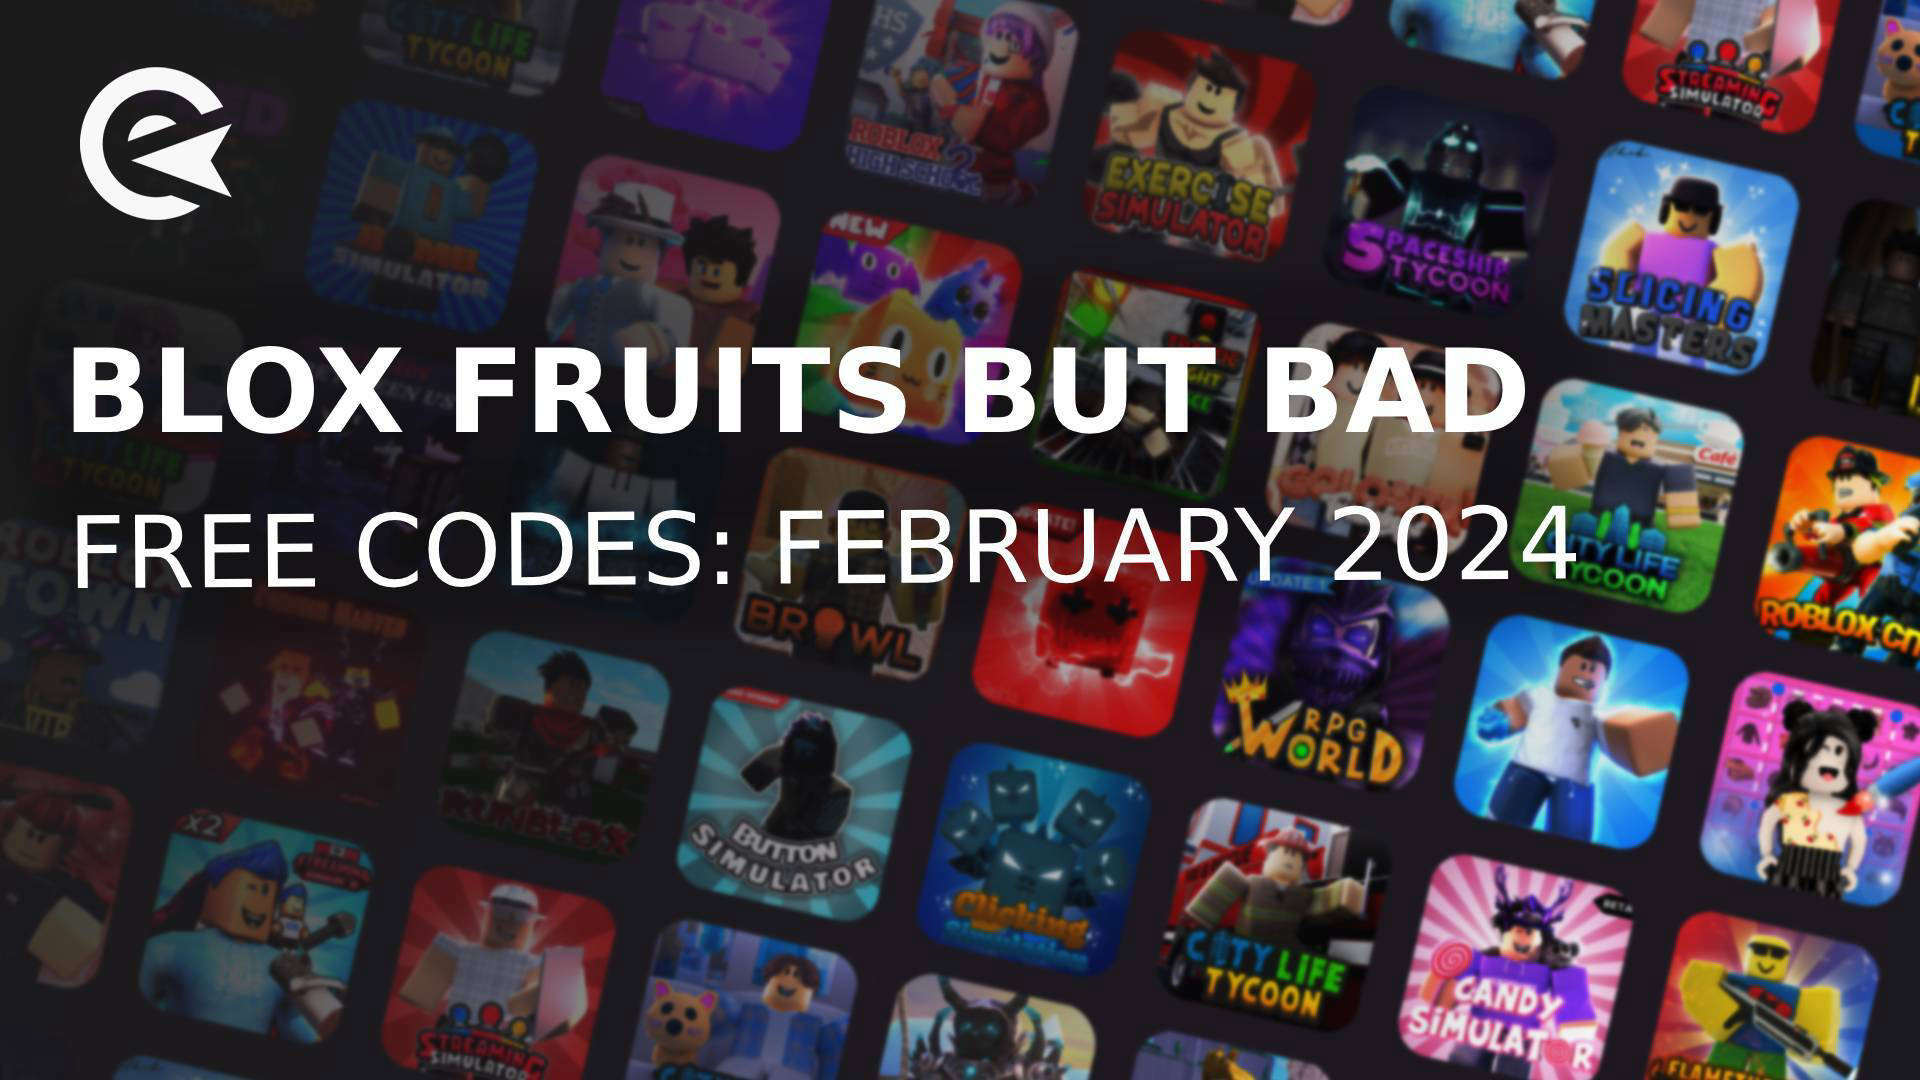 Blox Fruit But Bad Codes for February 2024